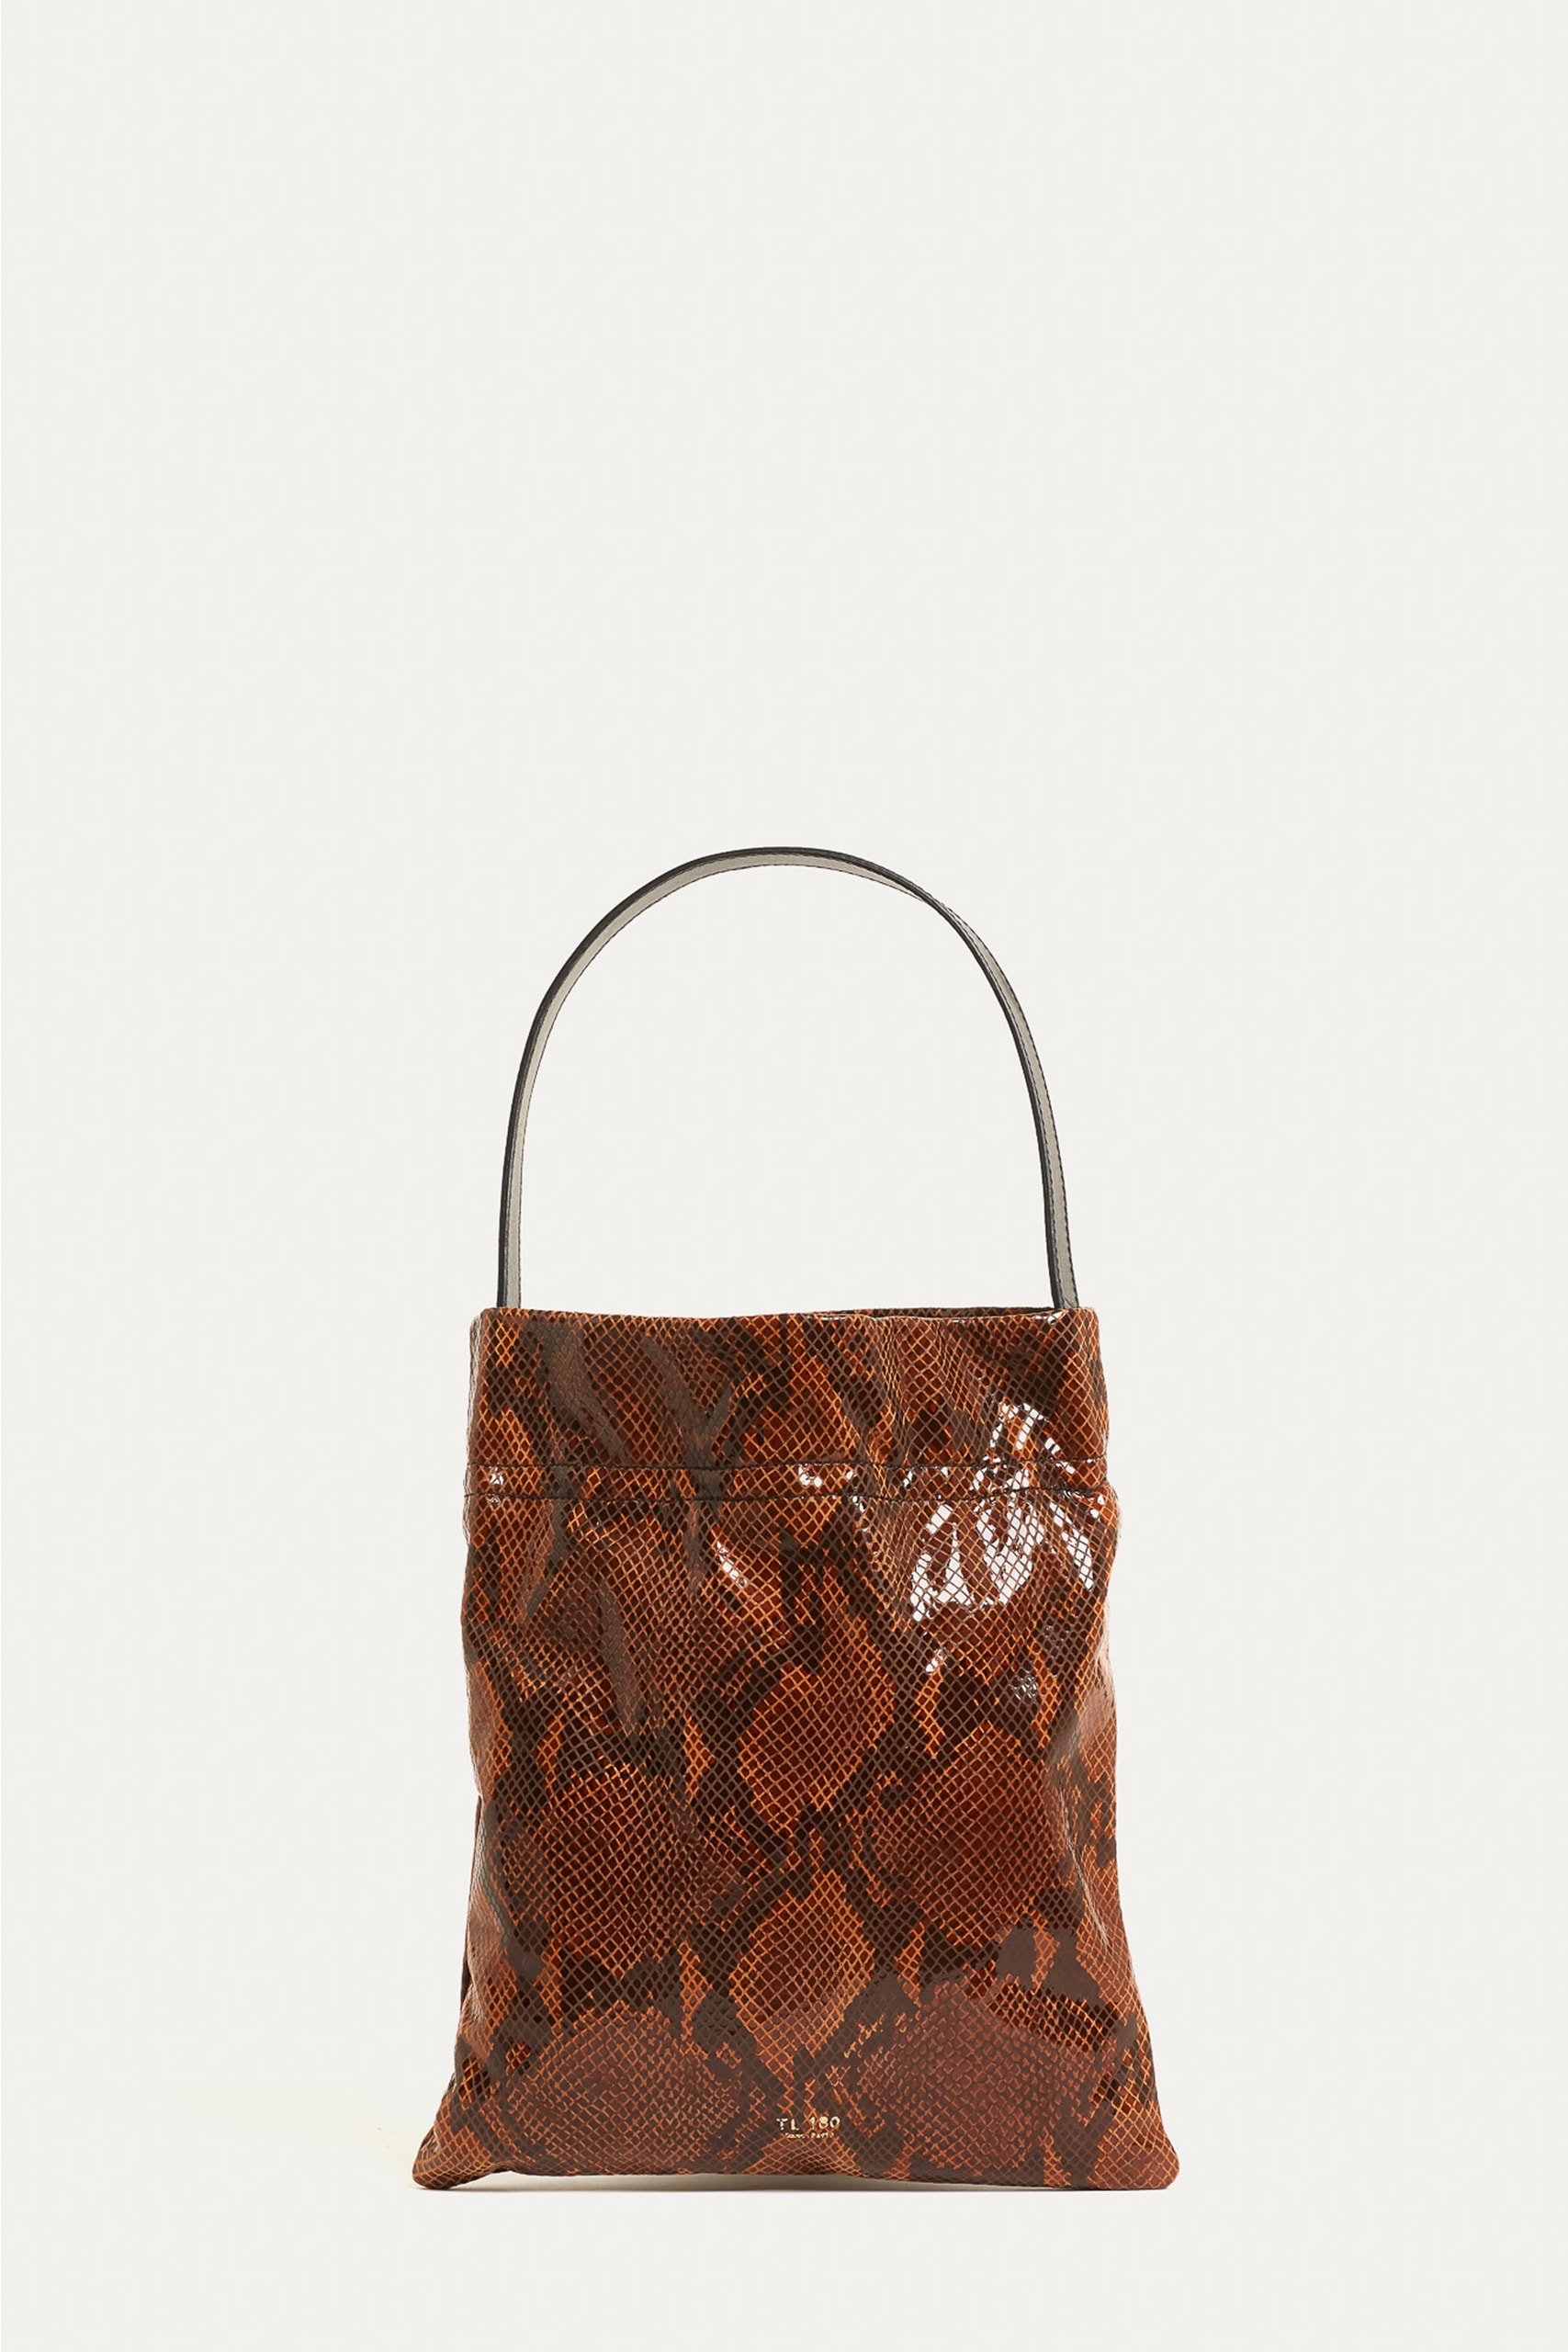 TL180 BAGS FAZZOLETTO LARGE PYTHON BROWN 03